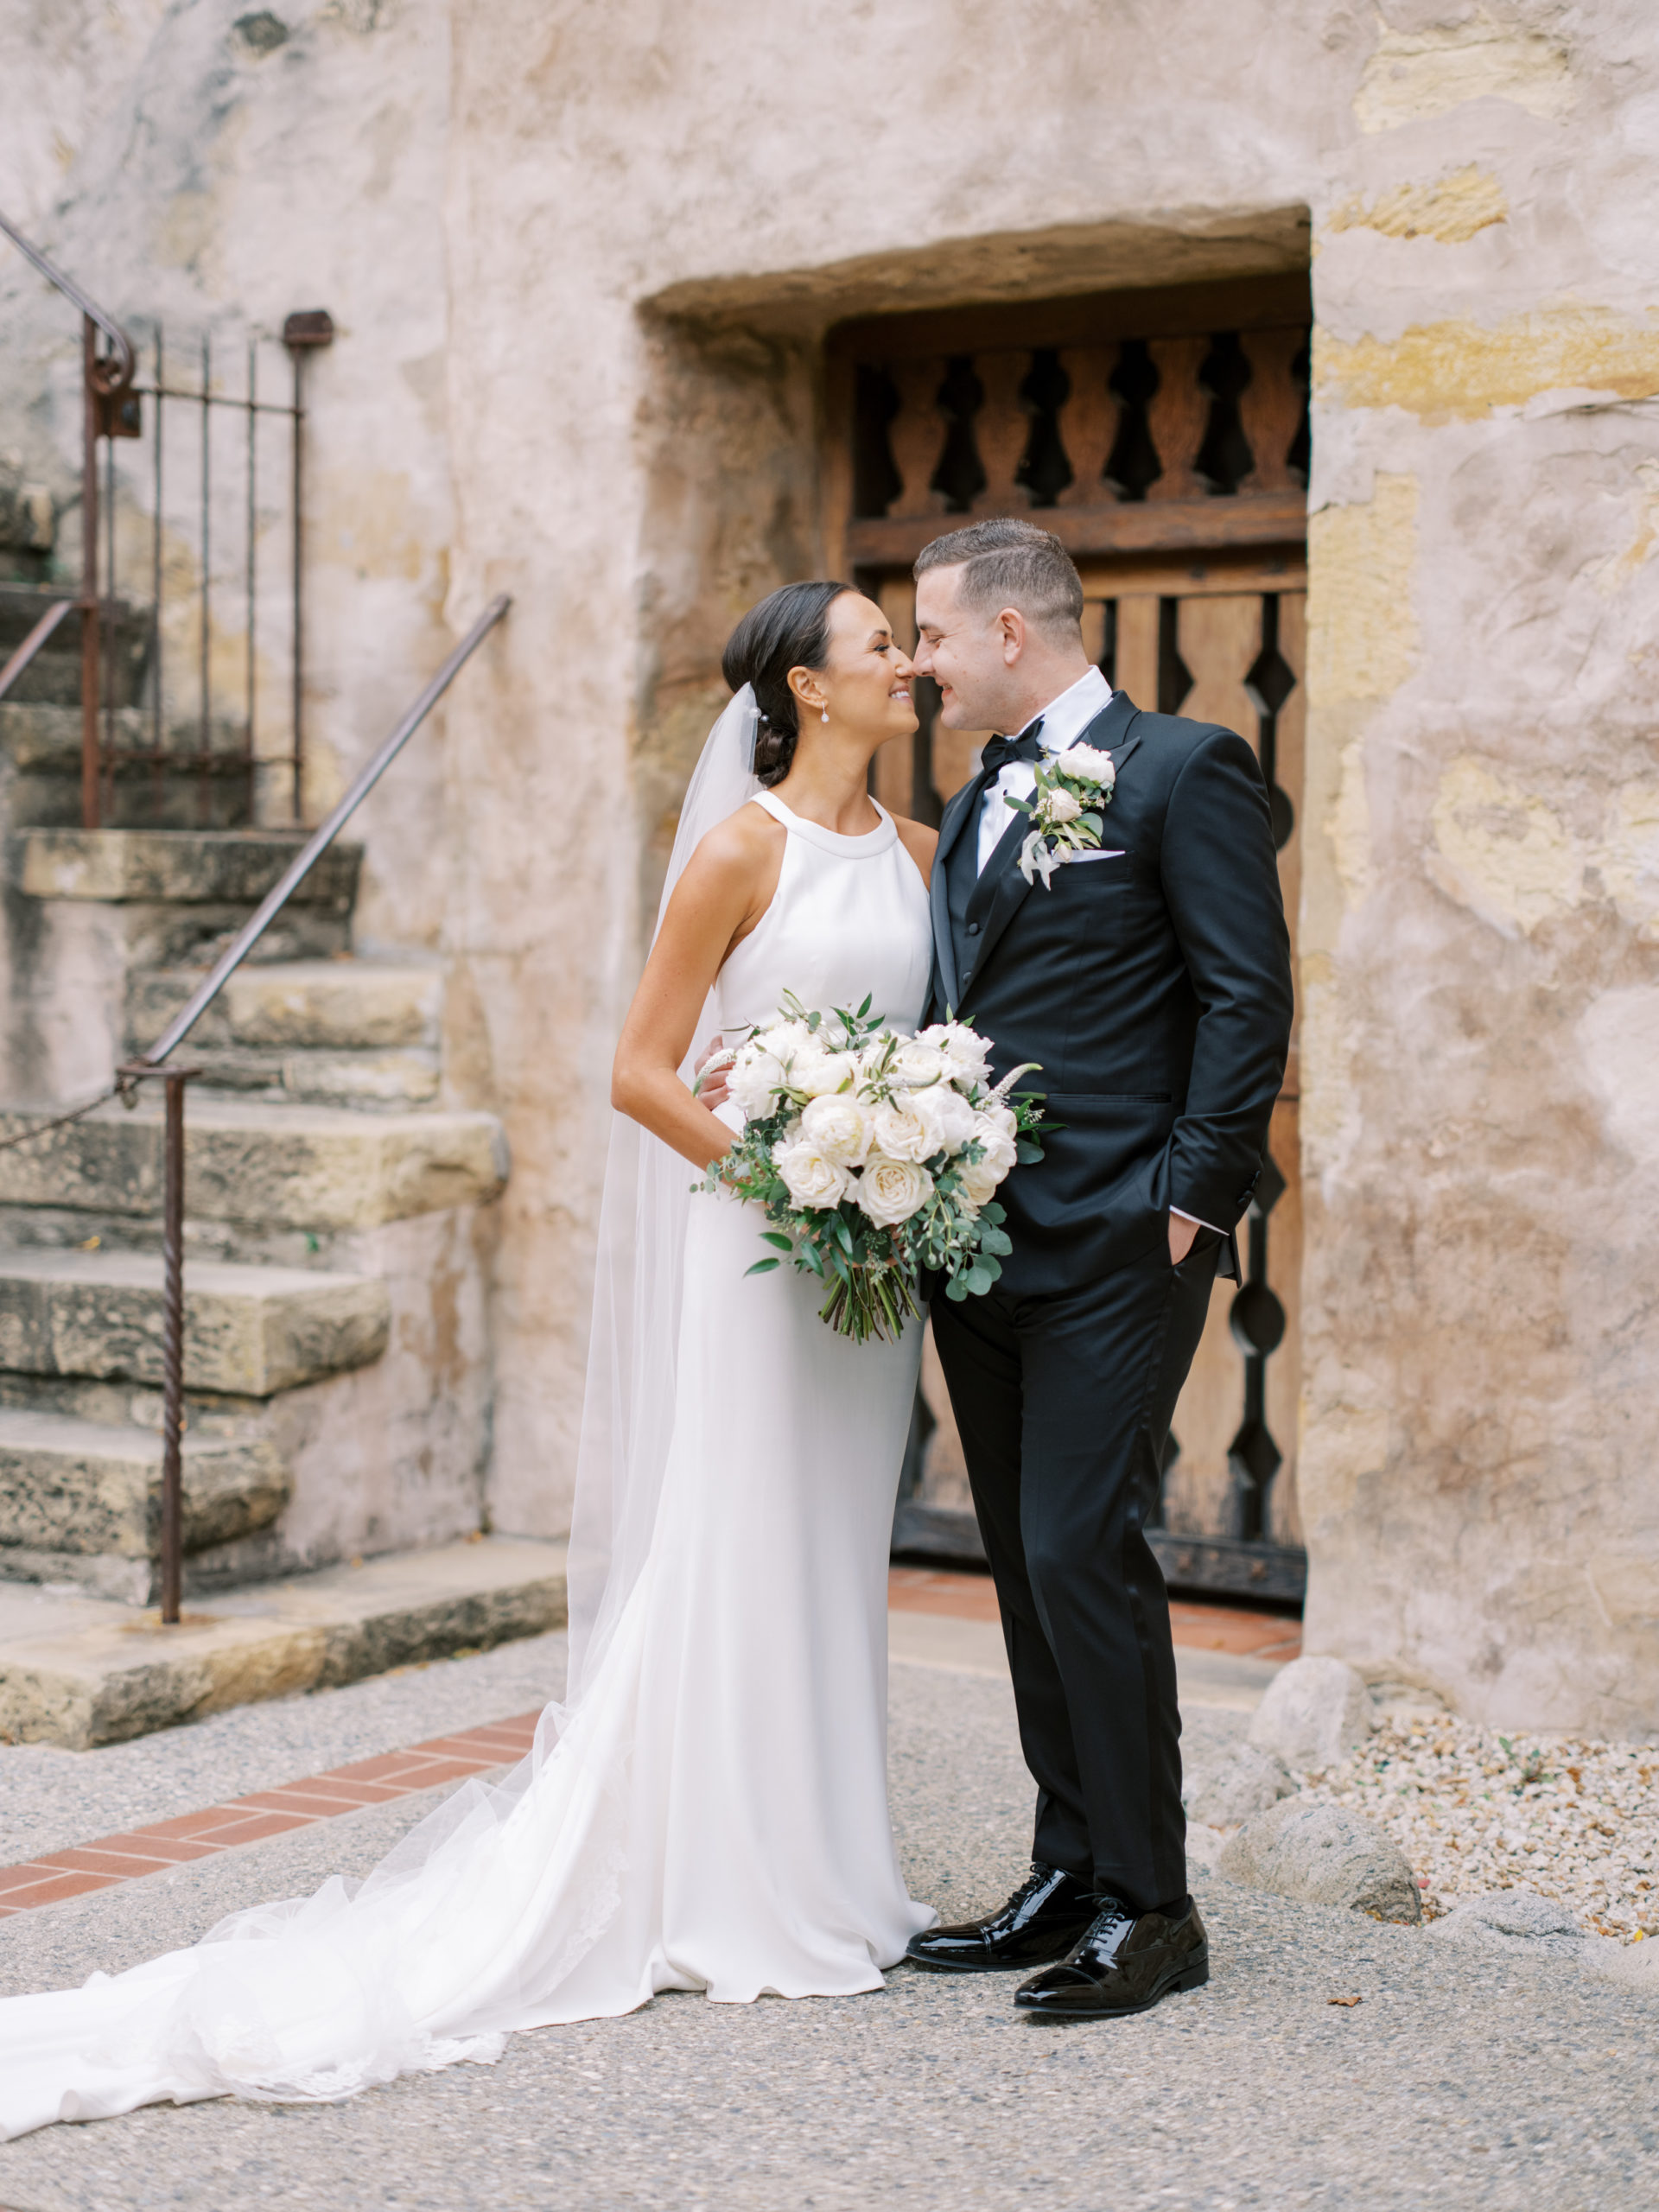 Folktale Winery Wedding and Carmel Mission Ceremony in courtyard